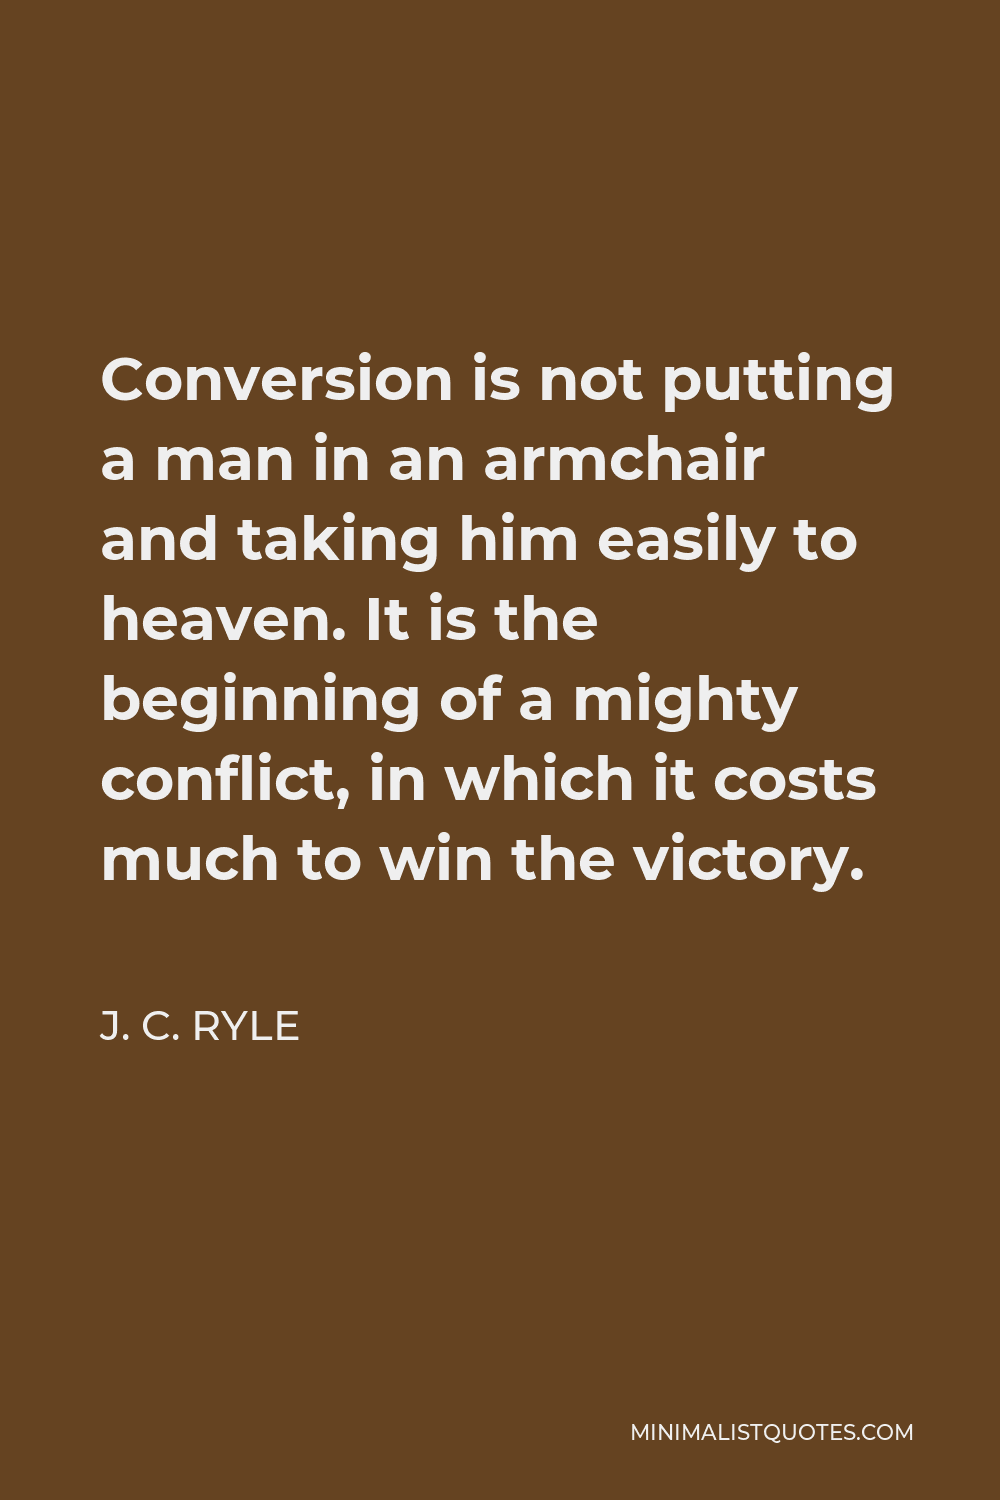 J. C. Ryle Quote - Conversion is not putting a man in an armchair and taking him easily to heaven. It is the beginning of a mighty conflict, in which it costs much to win the victory.